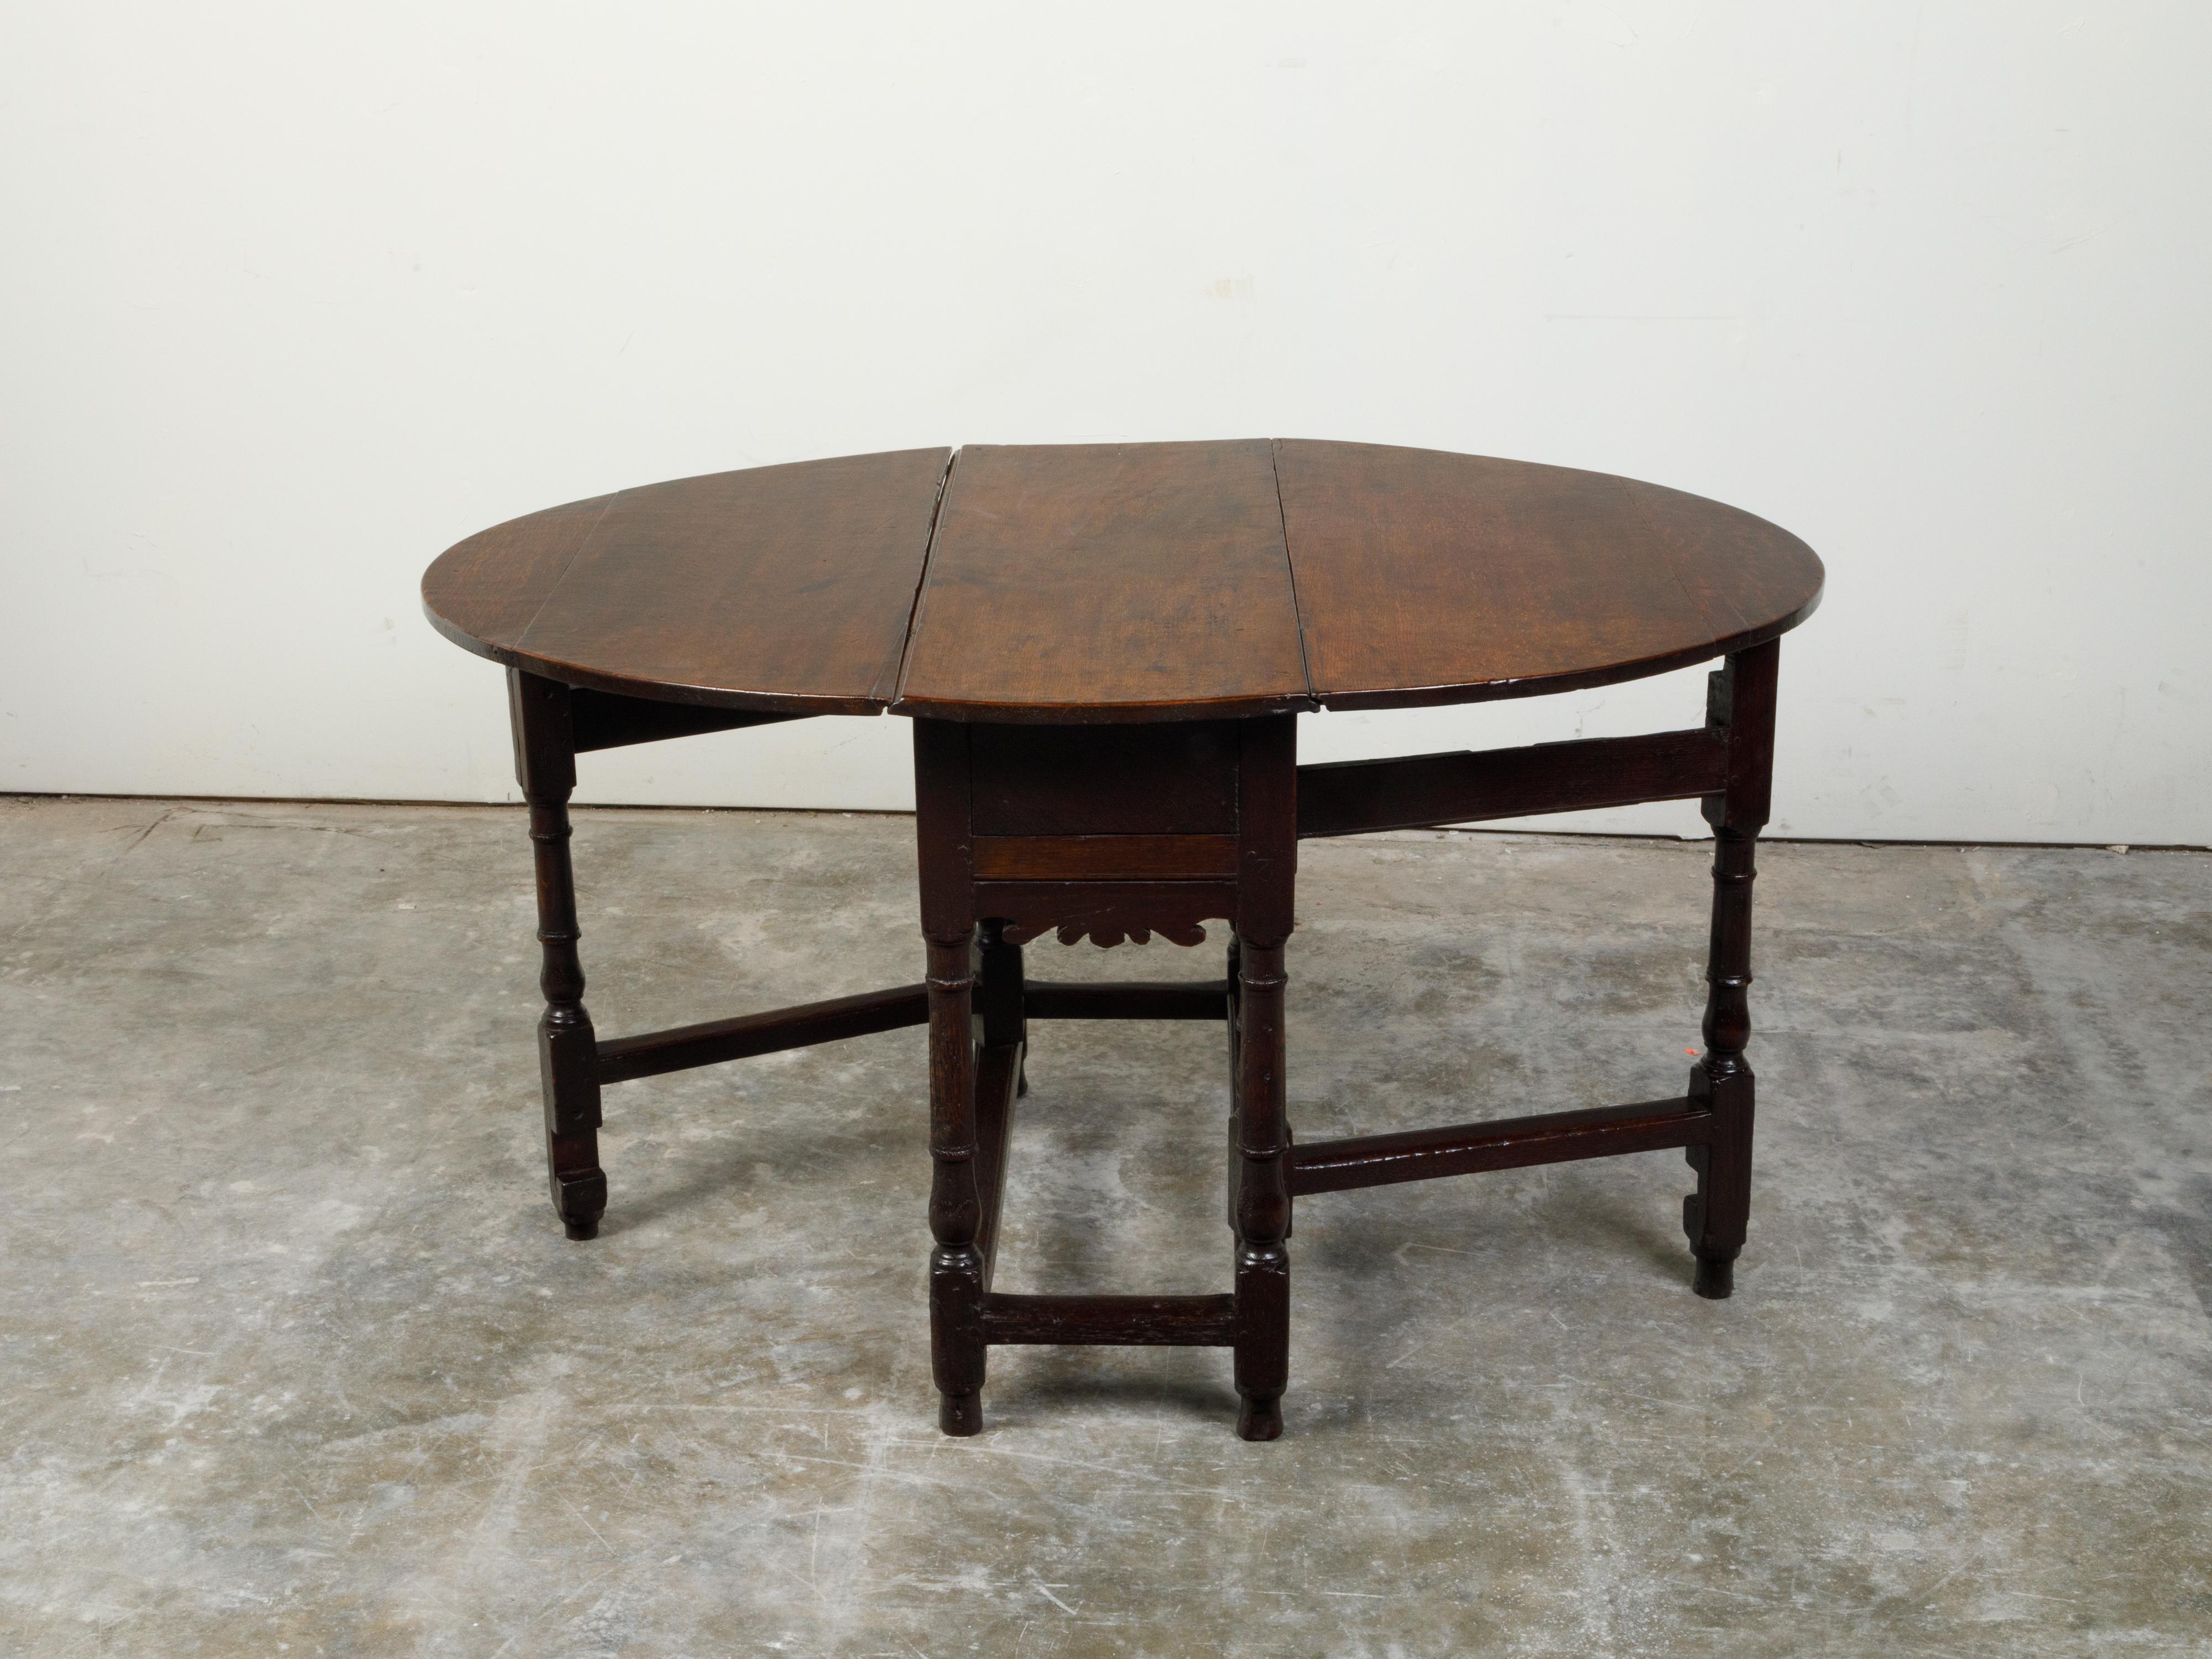 18th Century and Earlier English 18th Century Oval Top Drop-Leaf Gateleg Table with Turned Legs For Sale